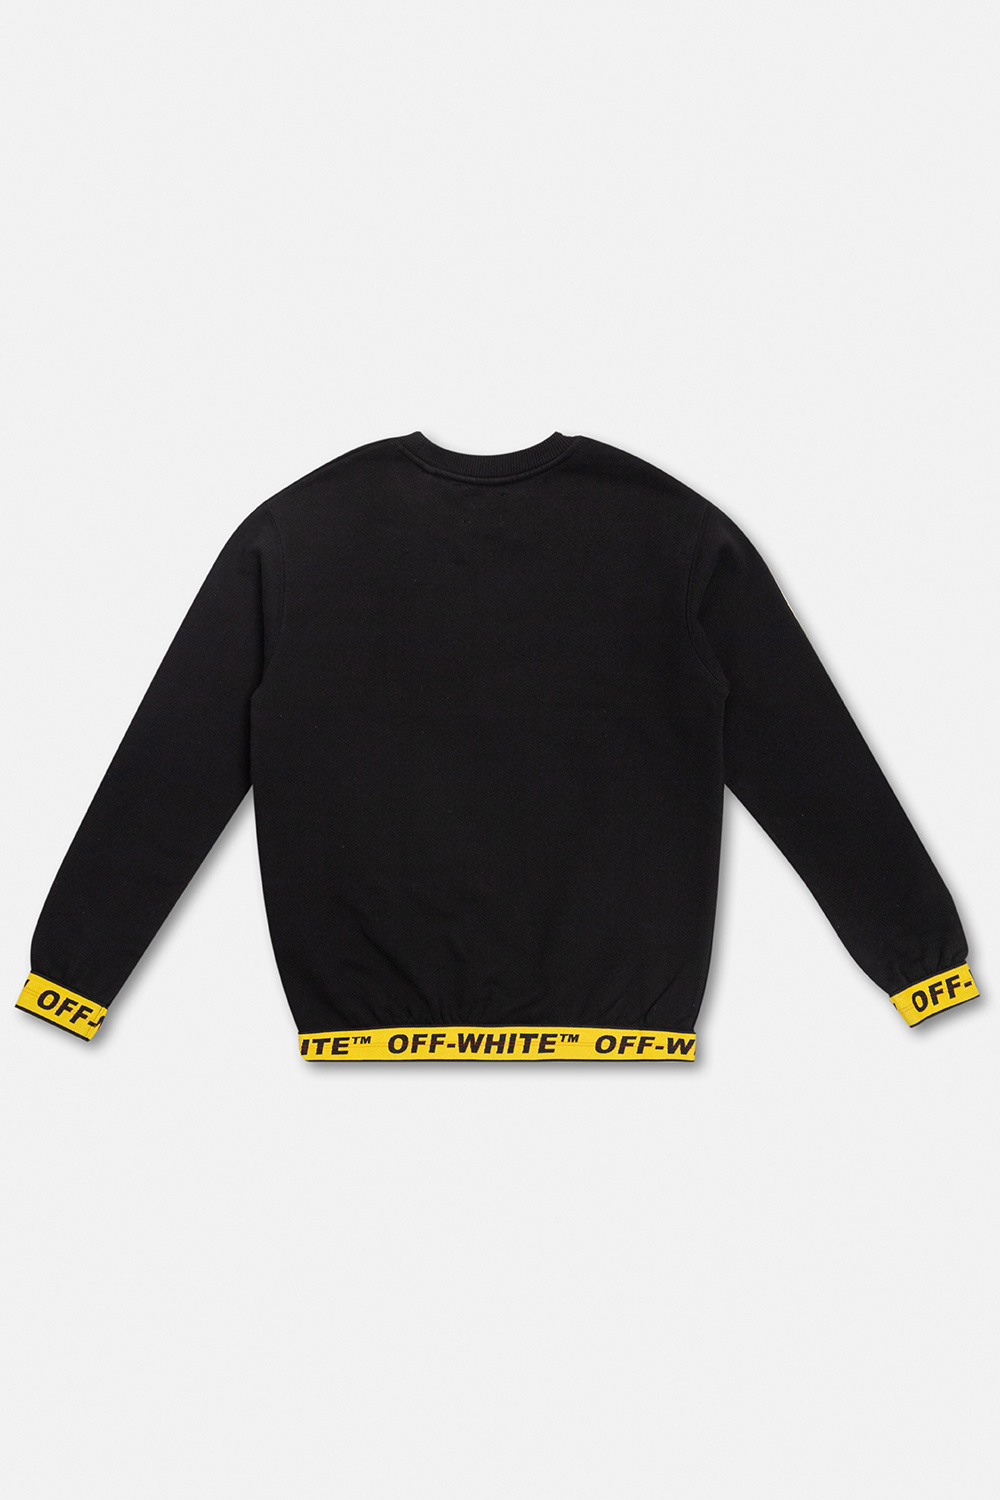 Off-White Kids that will serve you for years to come